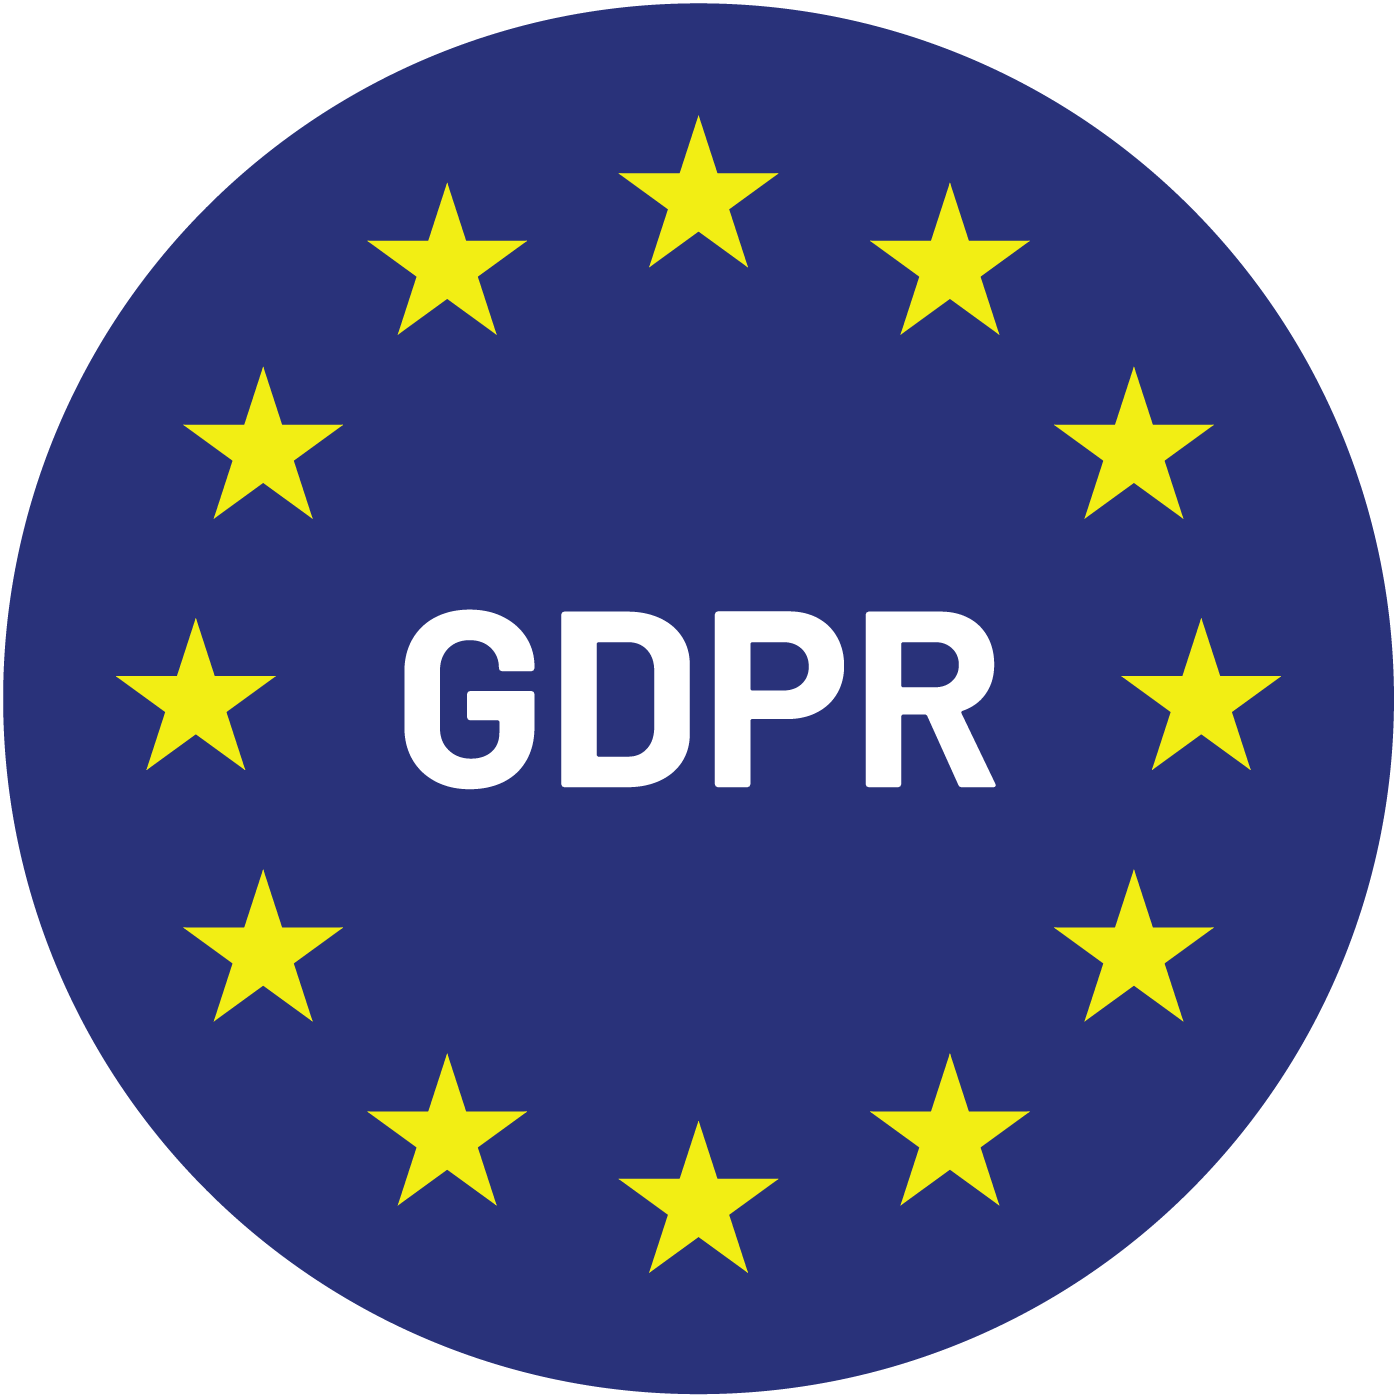 ## GDPR compliant

- General Data Protection Regulation
- Privacy and data protection
are real milestones in our
organization
- GDPR-compliance is a key factor in terms of trust and 
protection
